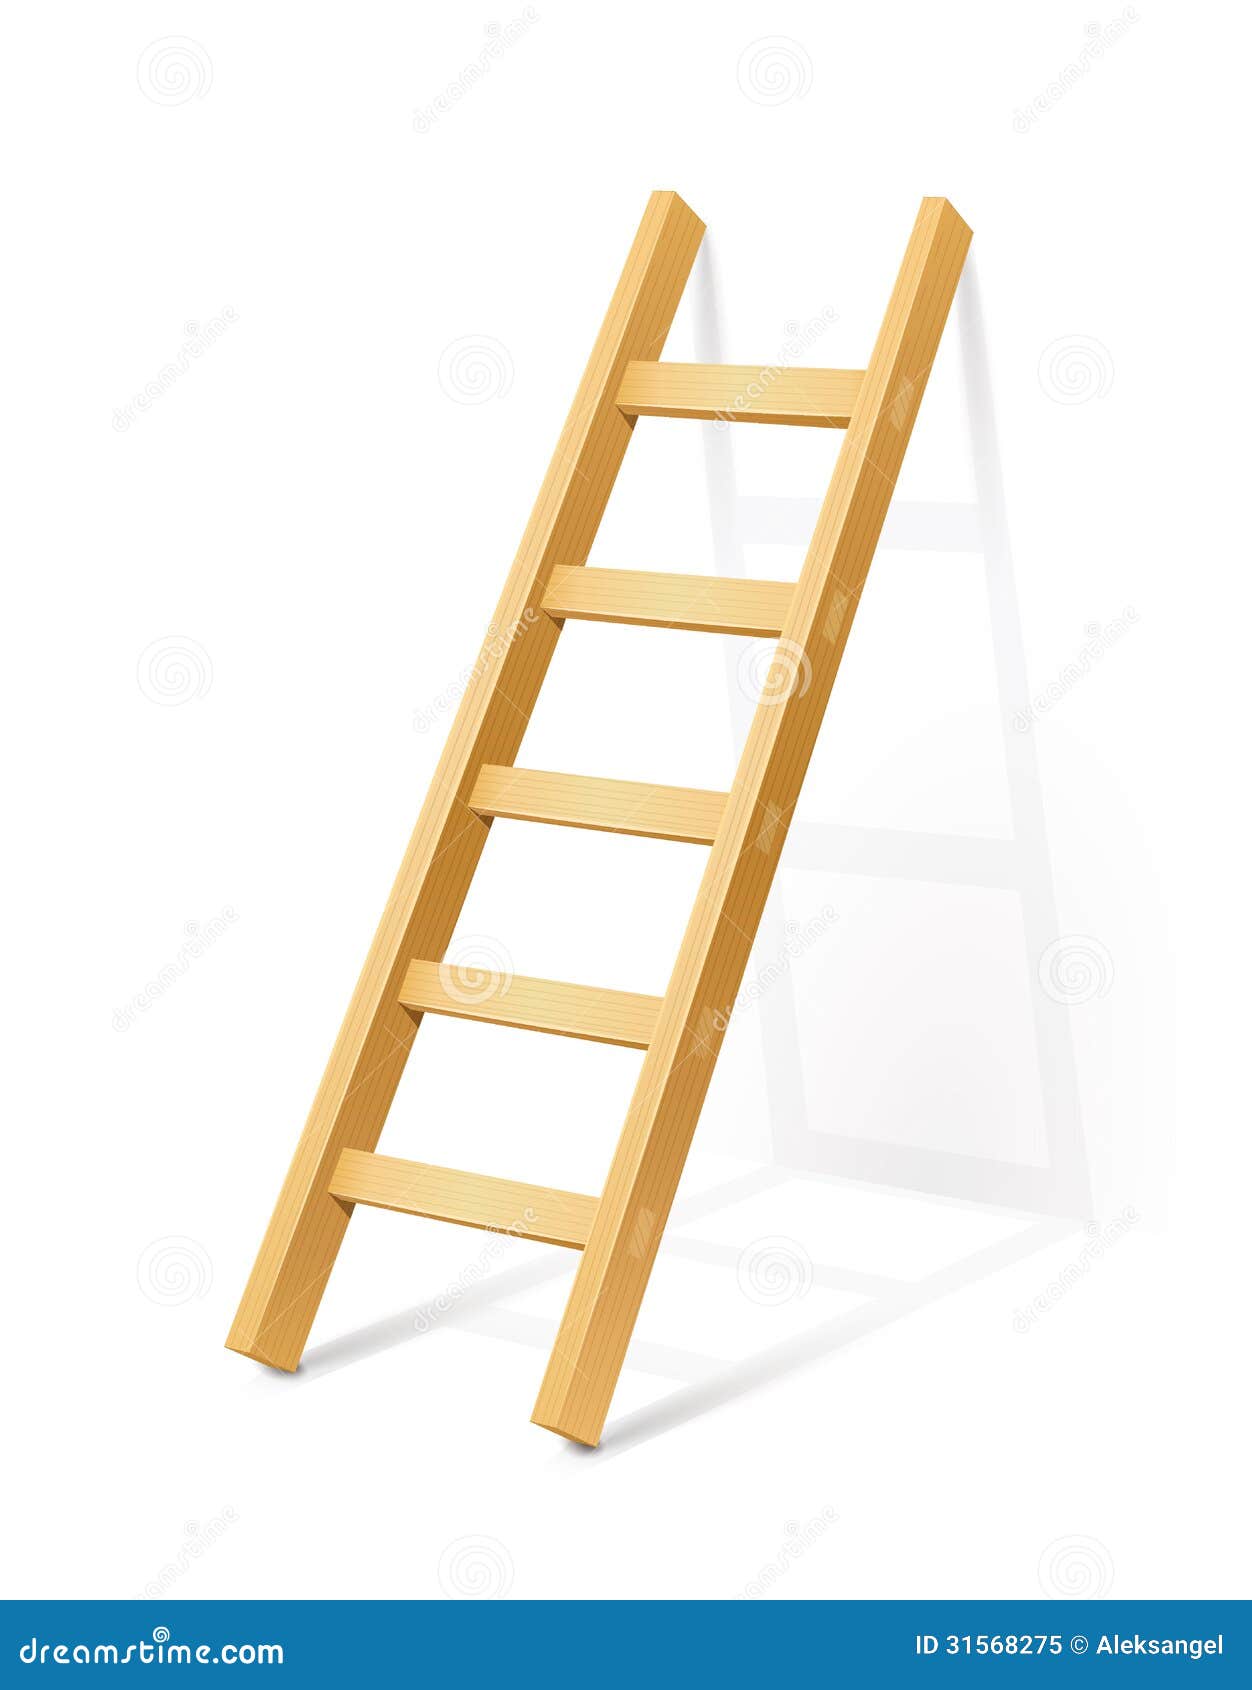 Wooden Step Ladder Royalty Free Stock Photo - Image: 31568275